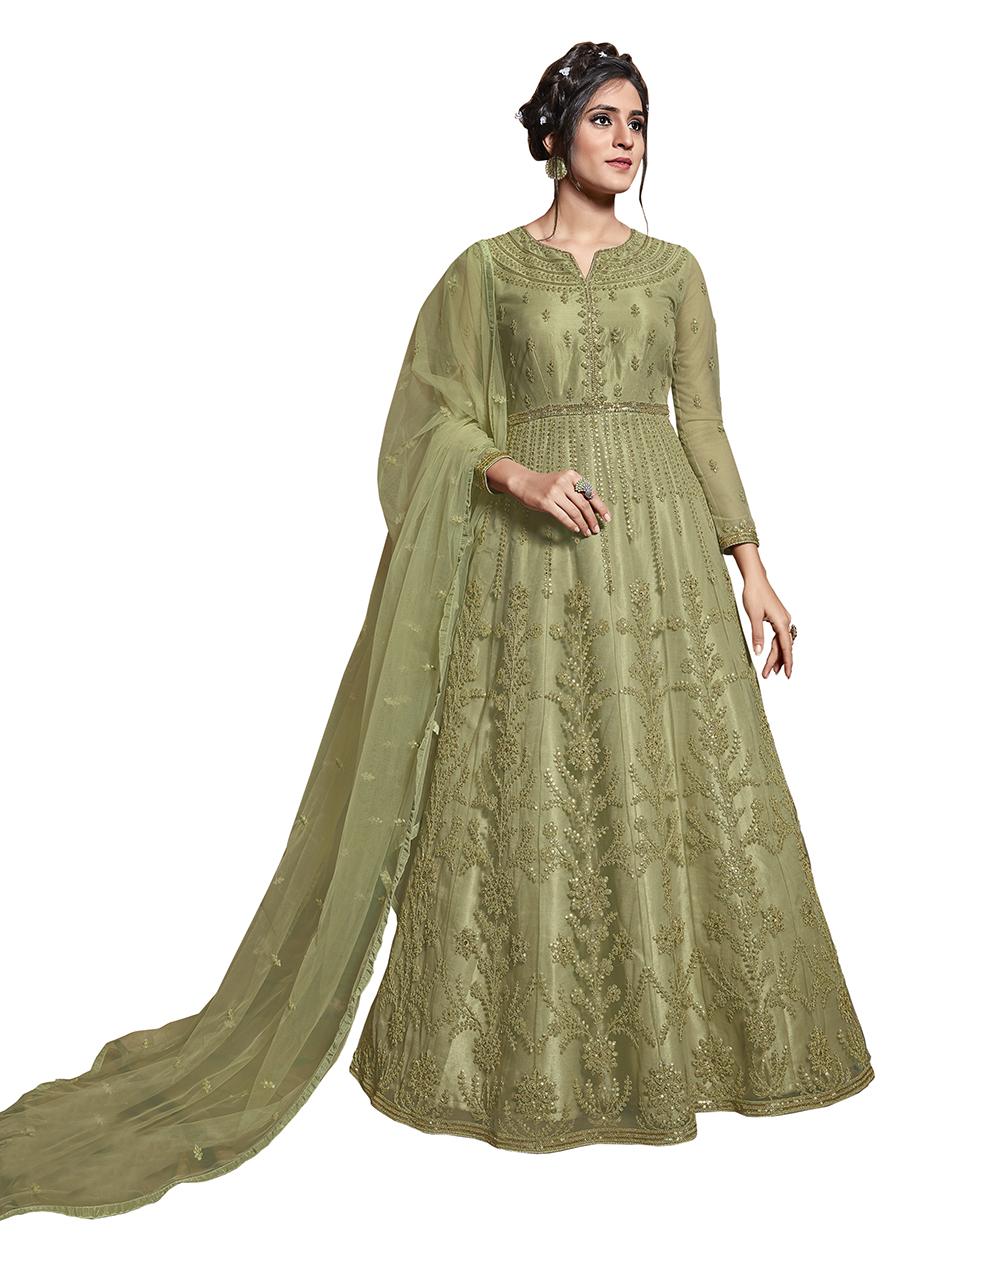 Sea Green Net Anarkali Suit with Heavy Embroidery Work SAF8658